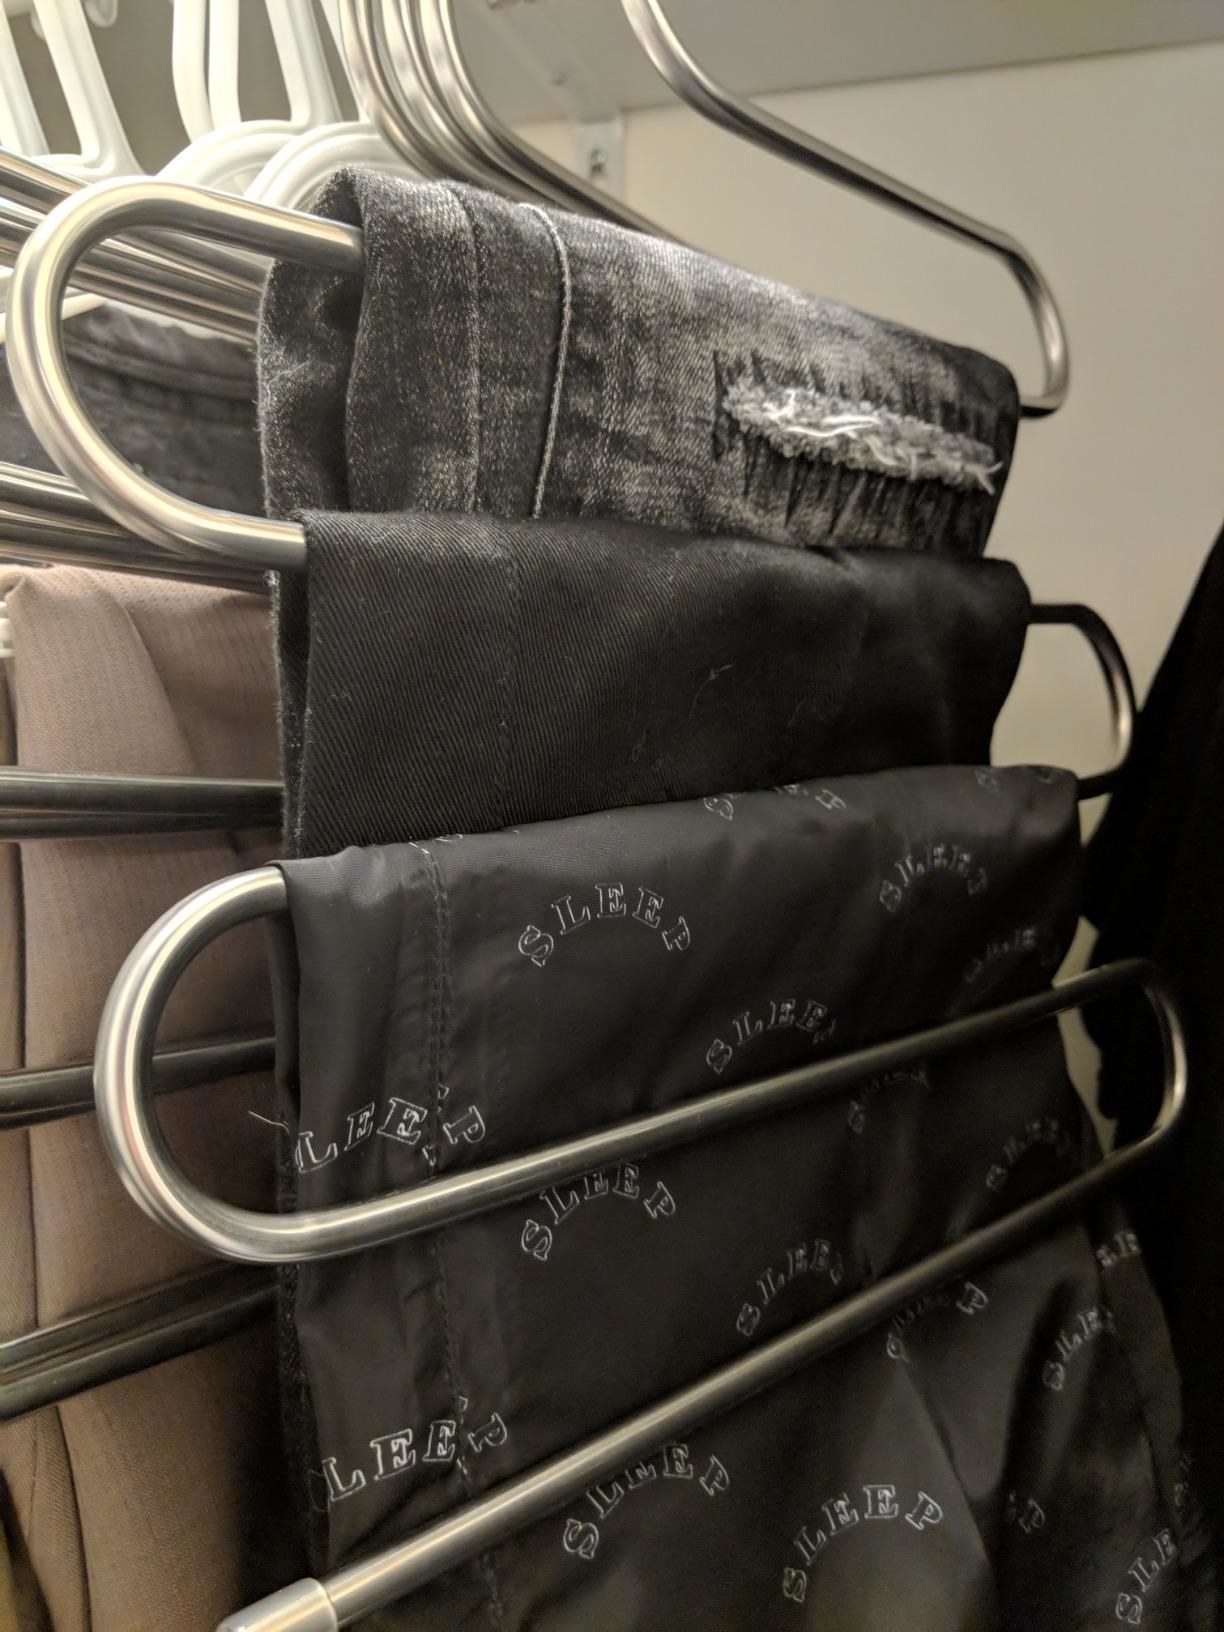 Reviewer image of three pairs of pants hanging from the silver rod